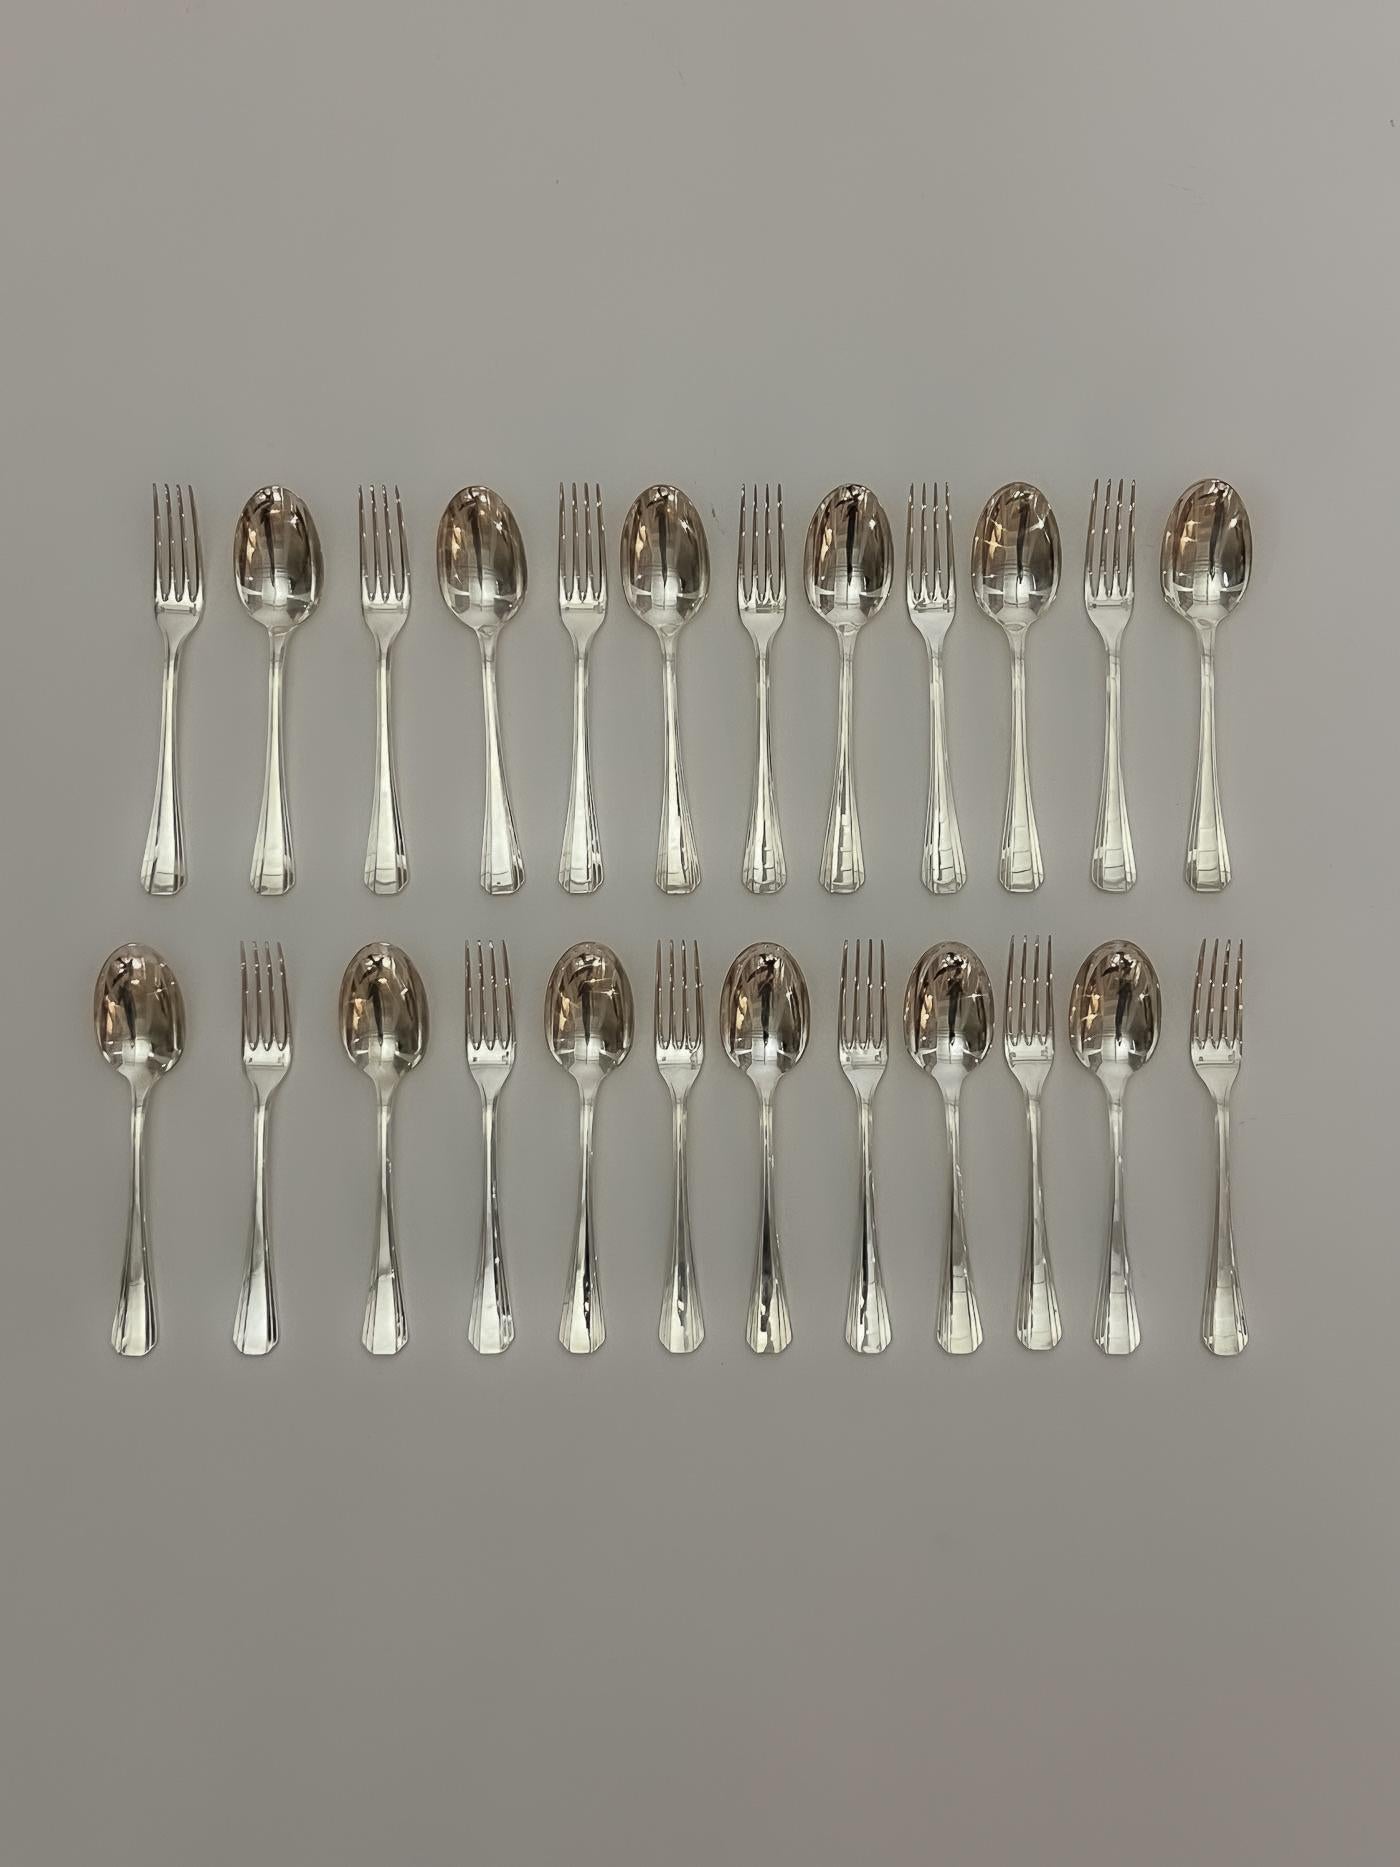 Silver-plated flatware set from Christofle, Boreal model designed by Luc Lanel in the 1930s. This flatware set consists of 12 forks and 12 soup spoons. In beautiful condition.
LP2226